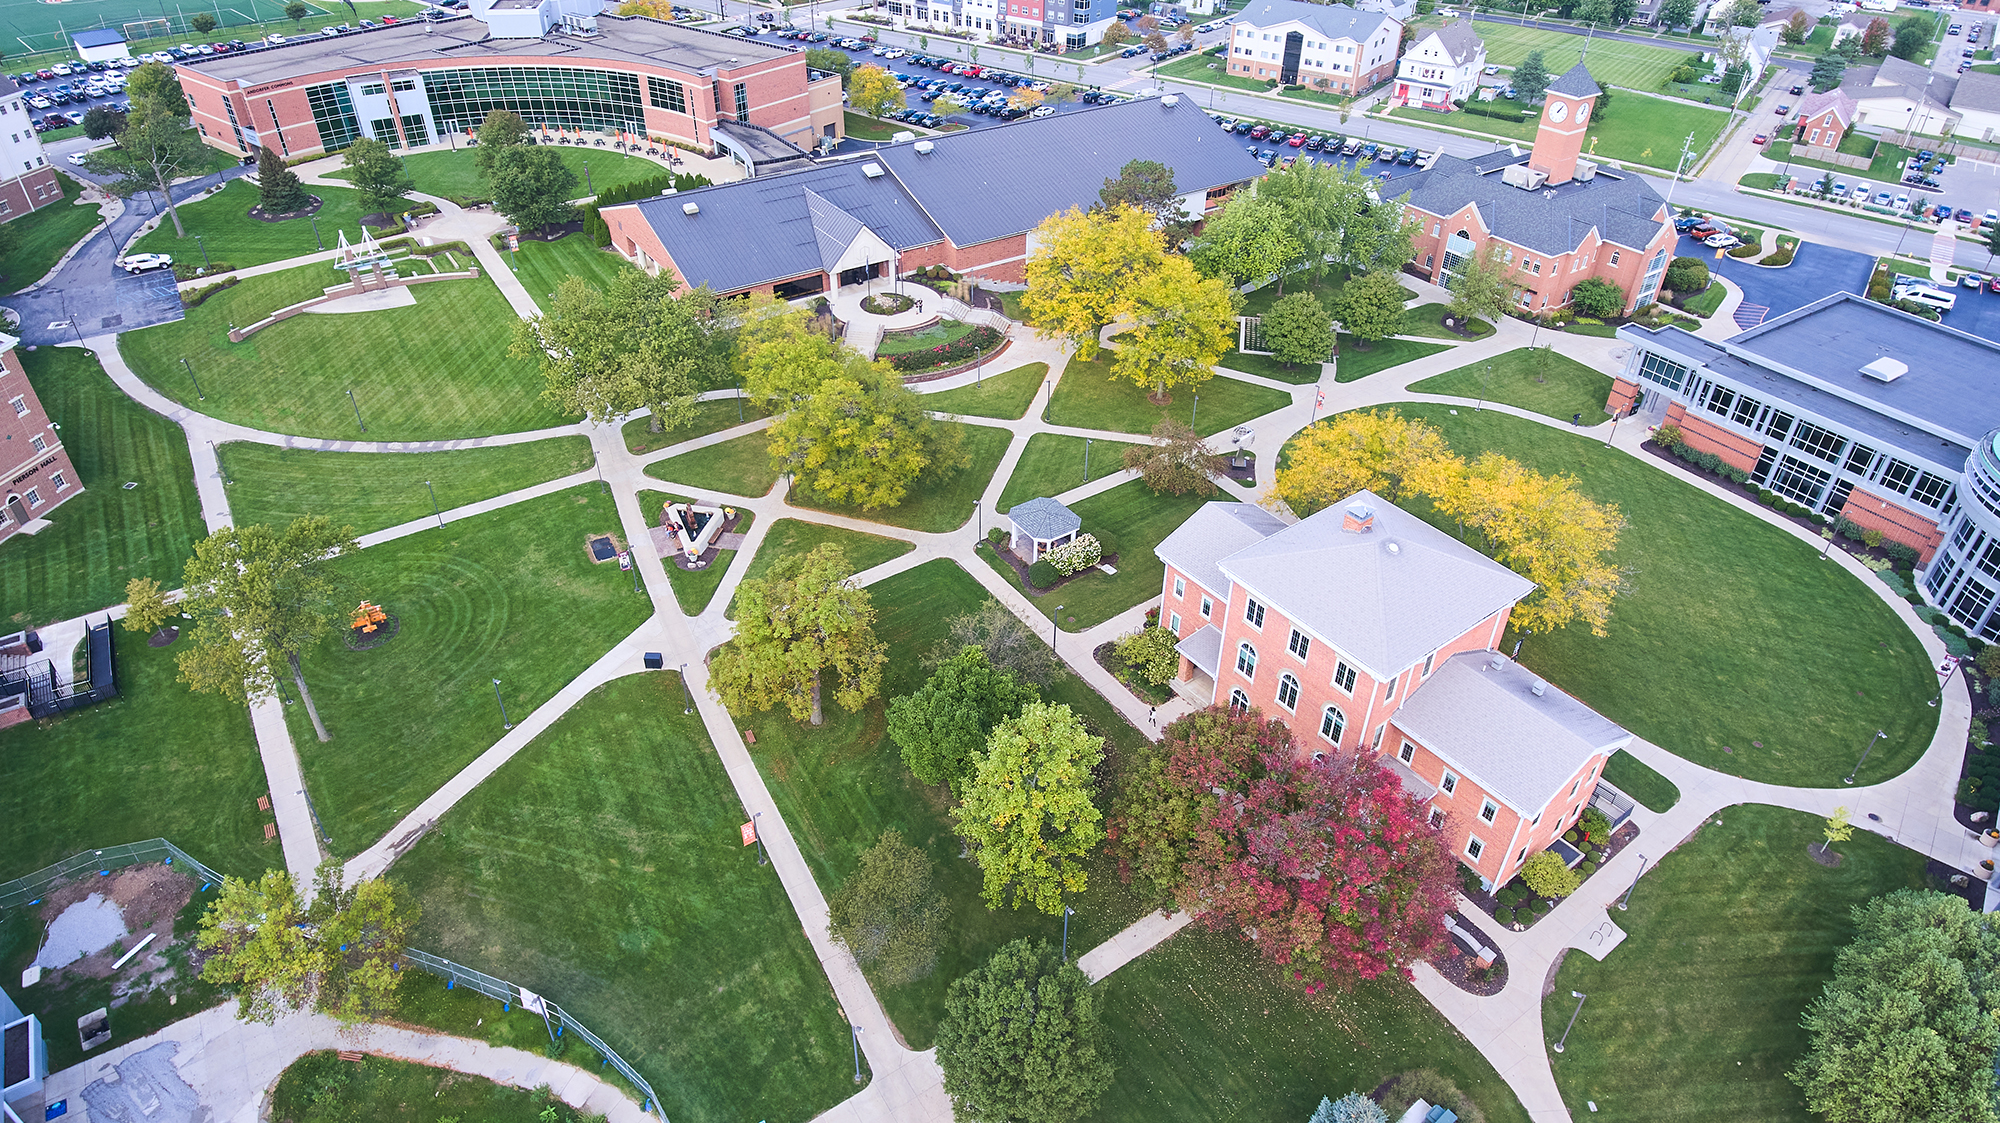 Bird's eye view of landscaping and grass at Indiana Tech campus maintained by Vision Scapes